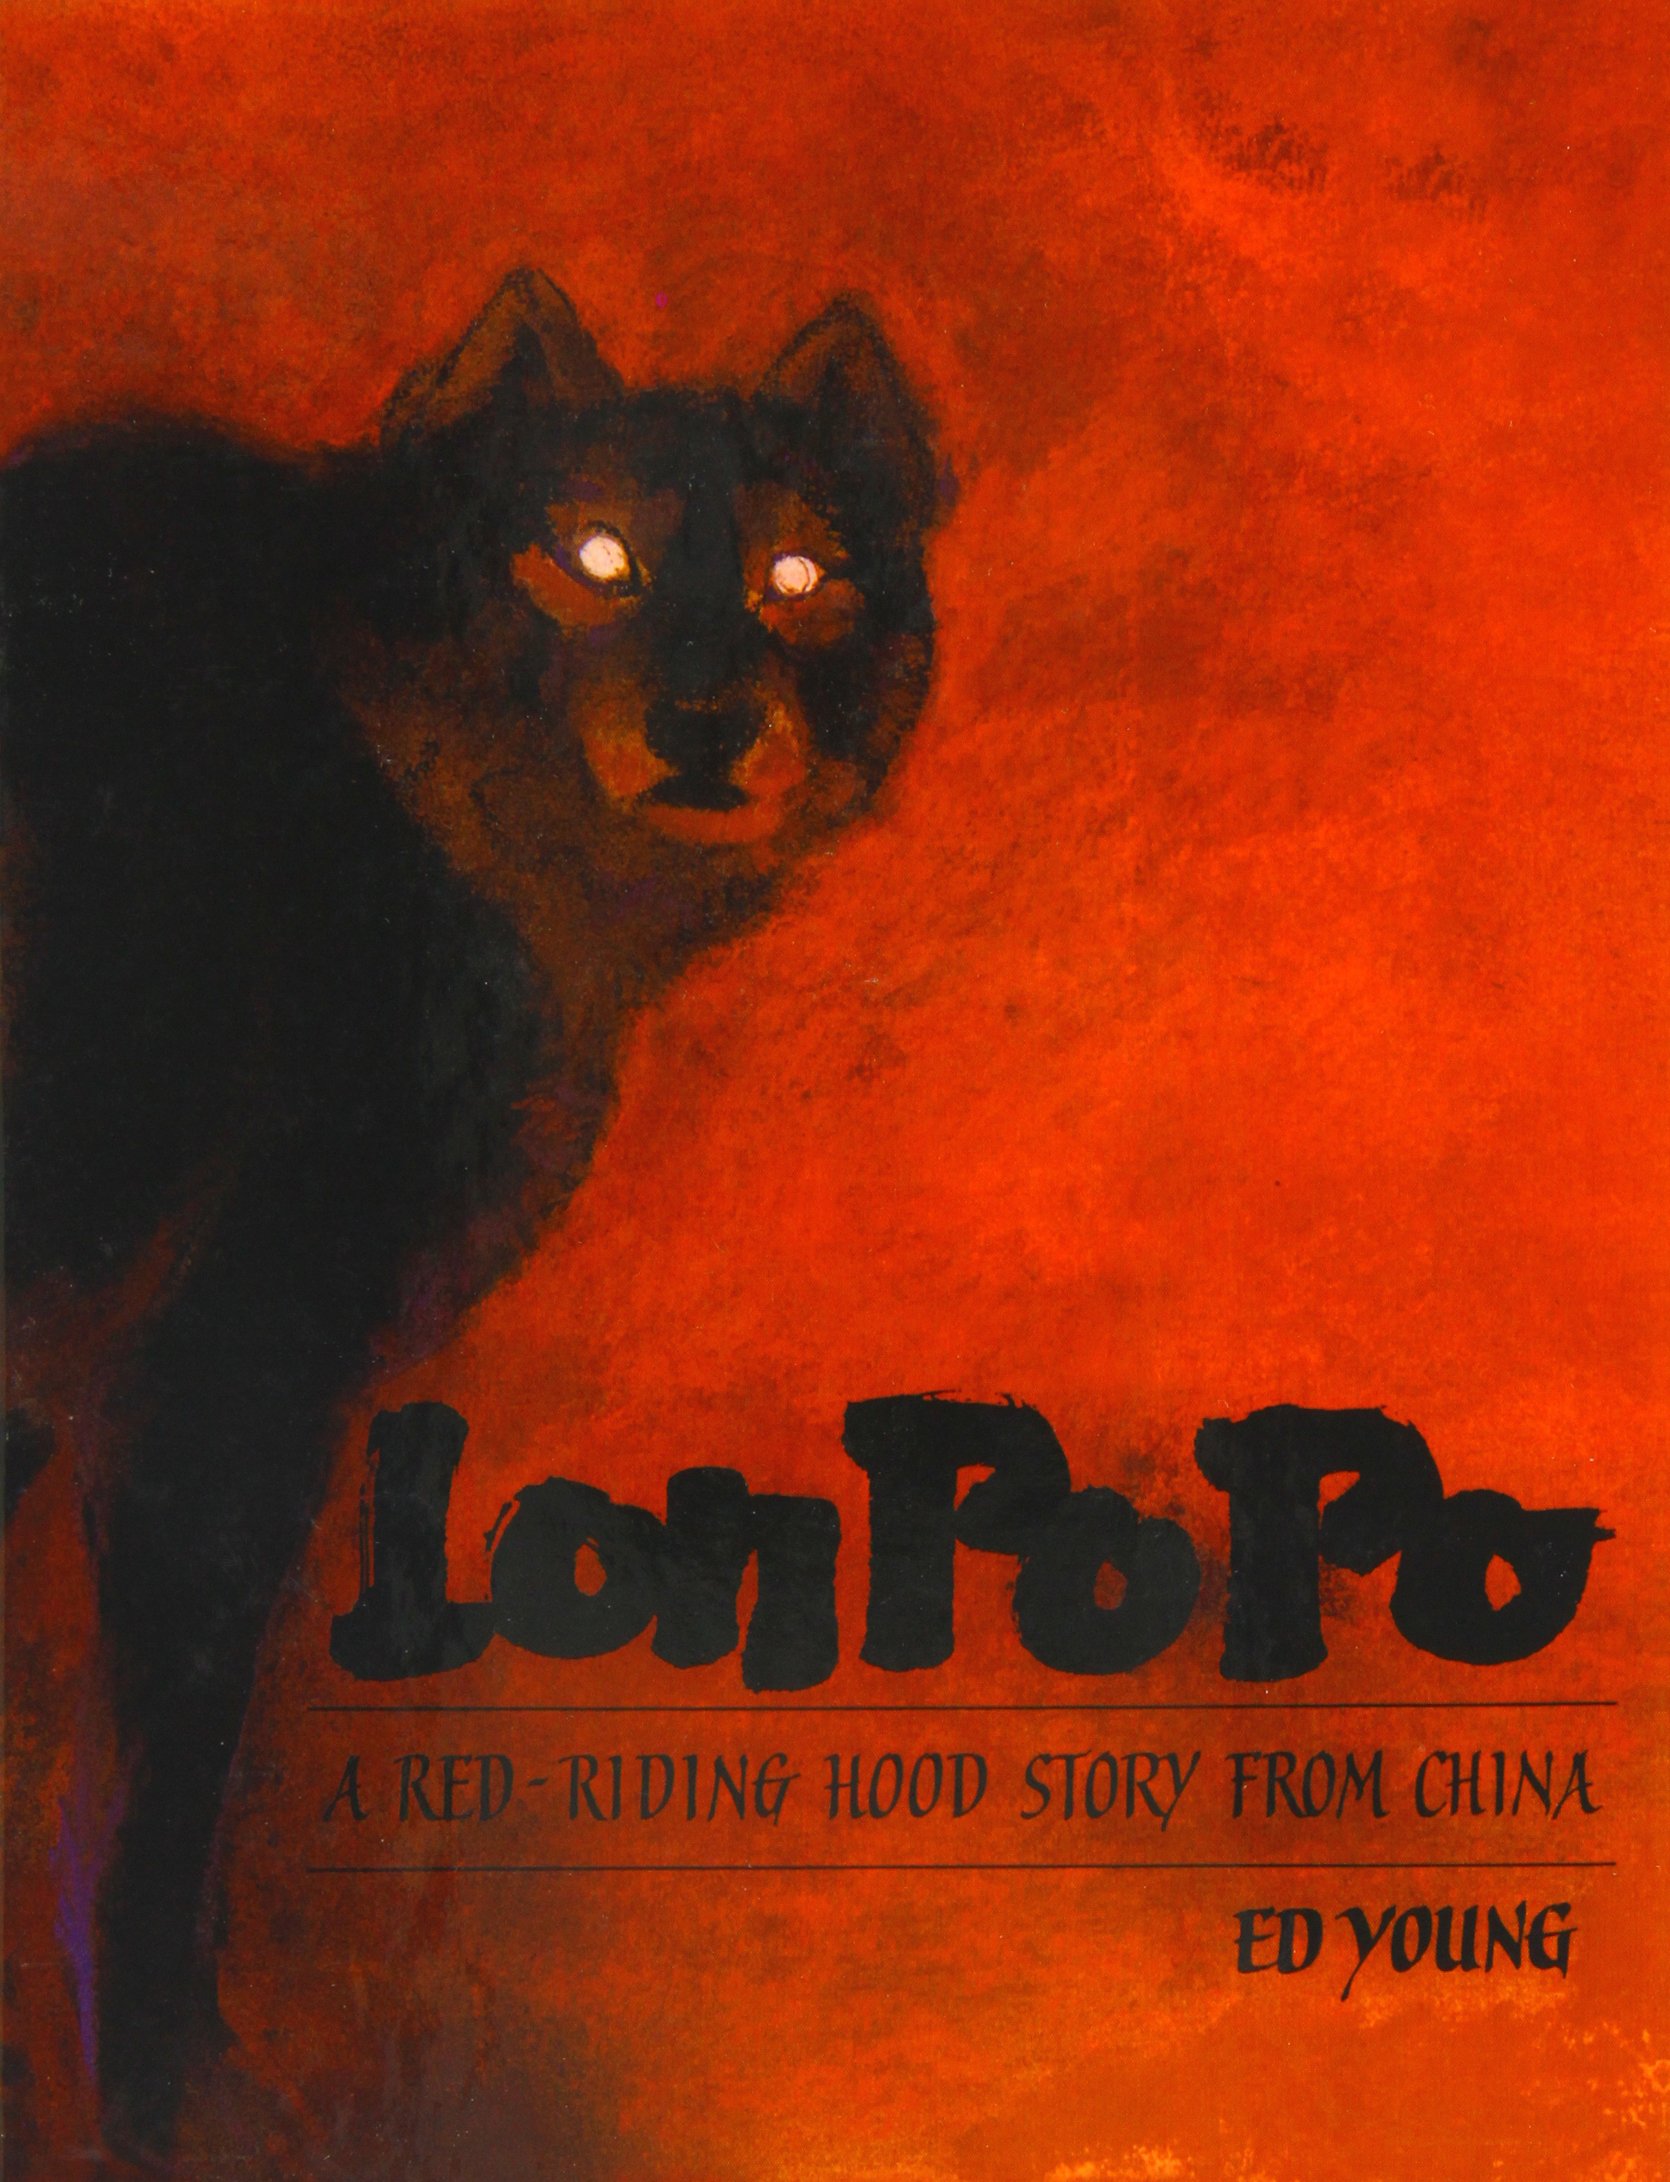 Lon Po Po: A Red Riding Hood Story from China, 1989